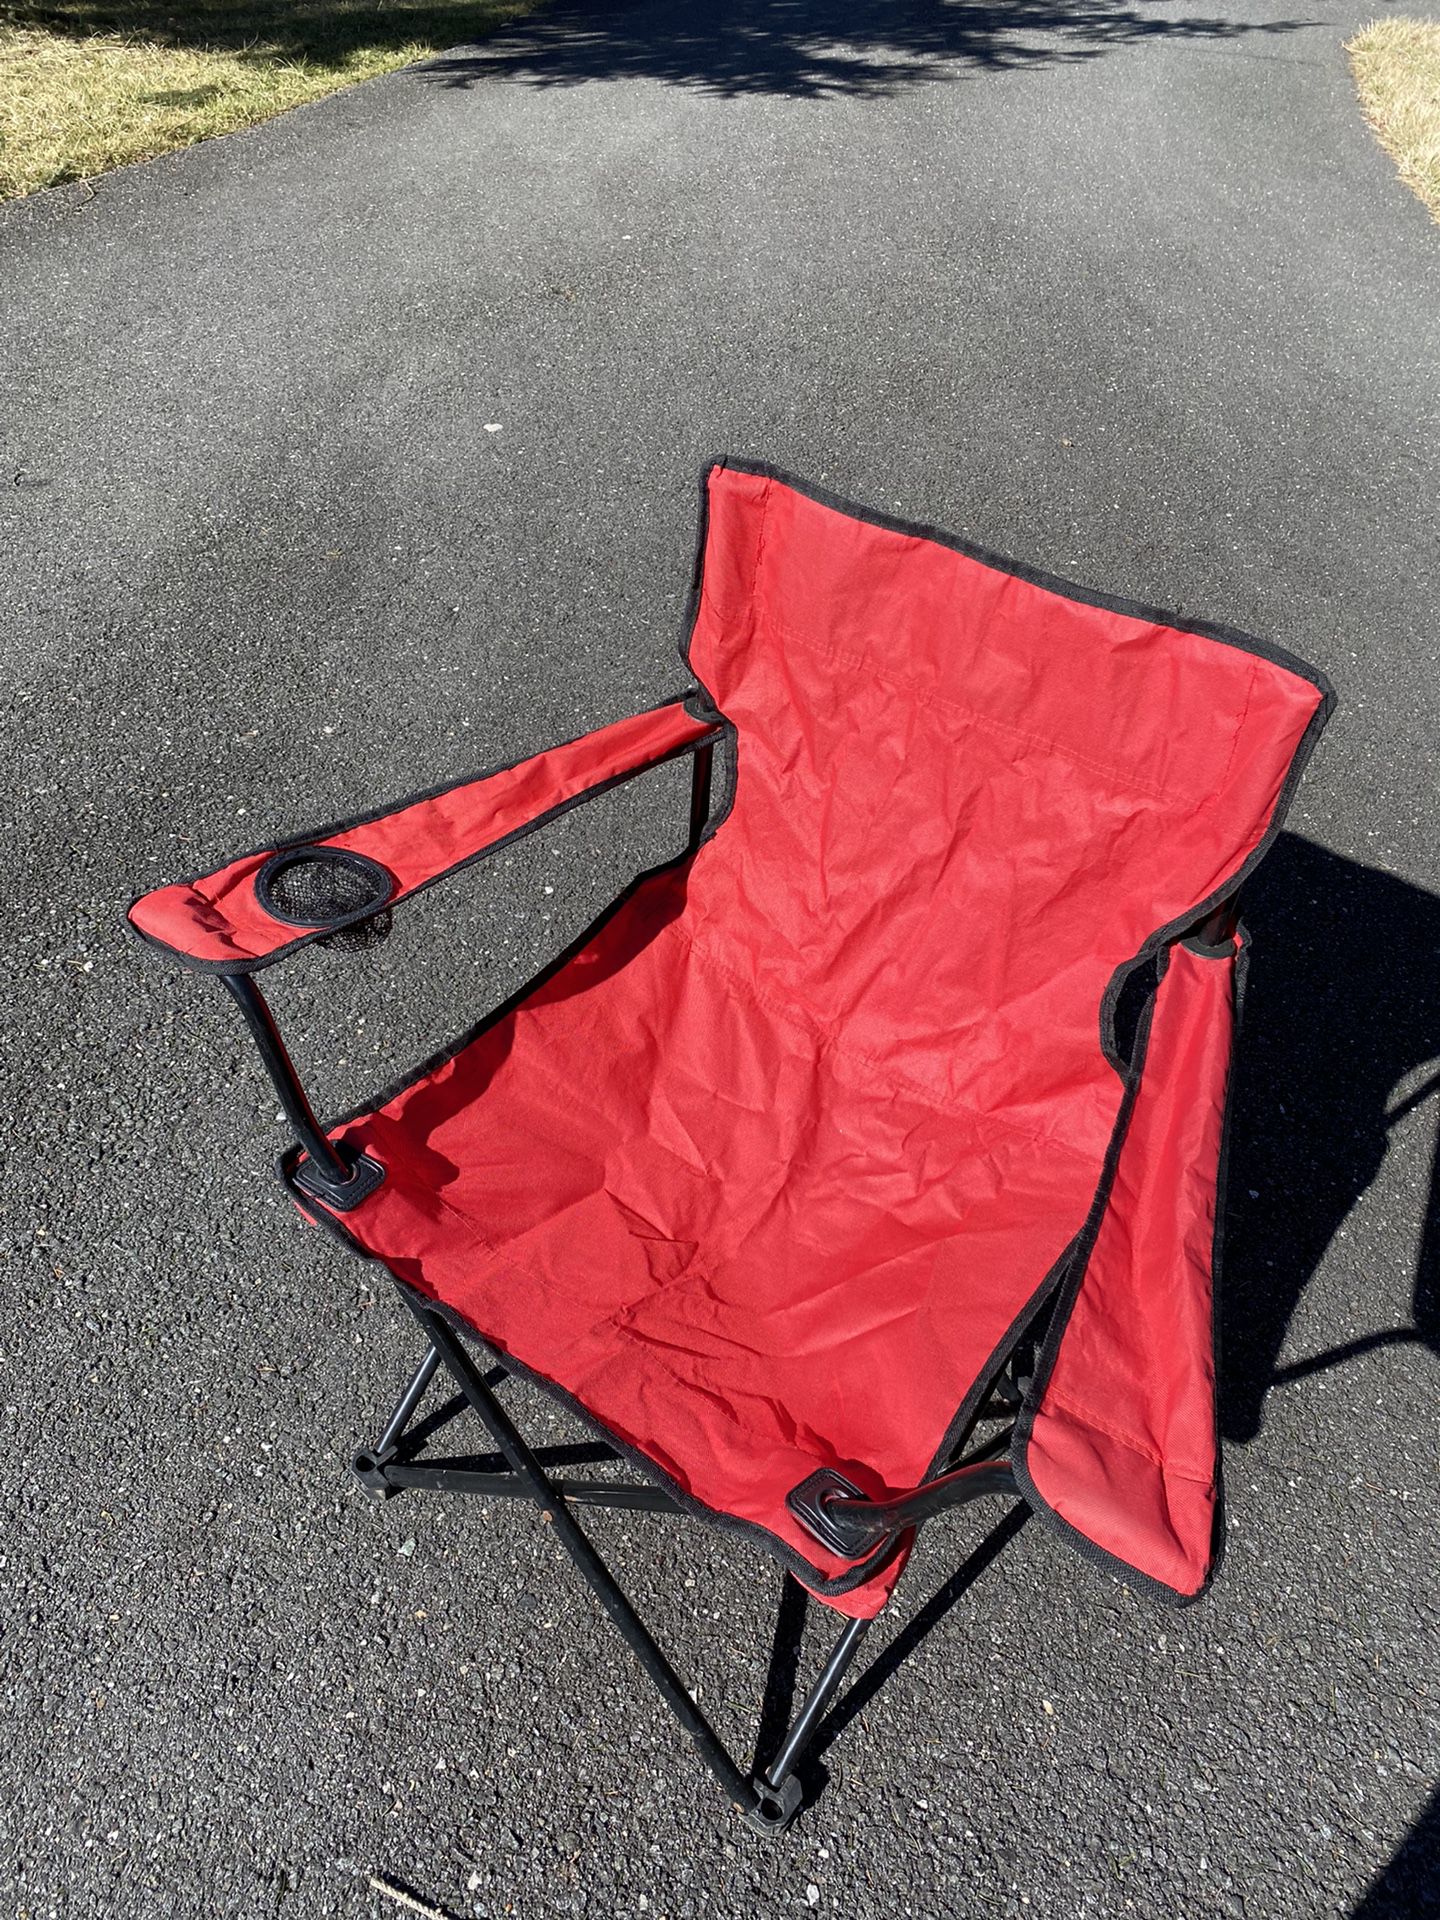 Folding Camping Chair Color Bright Red